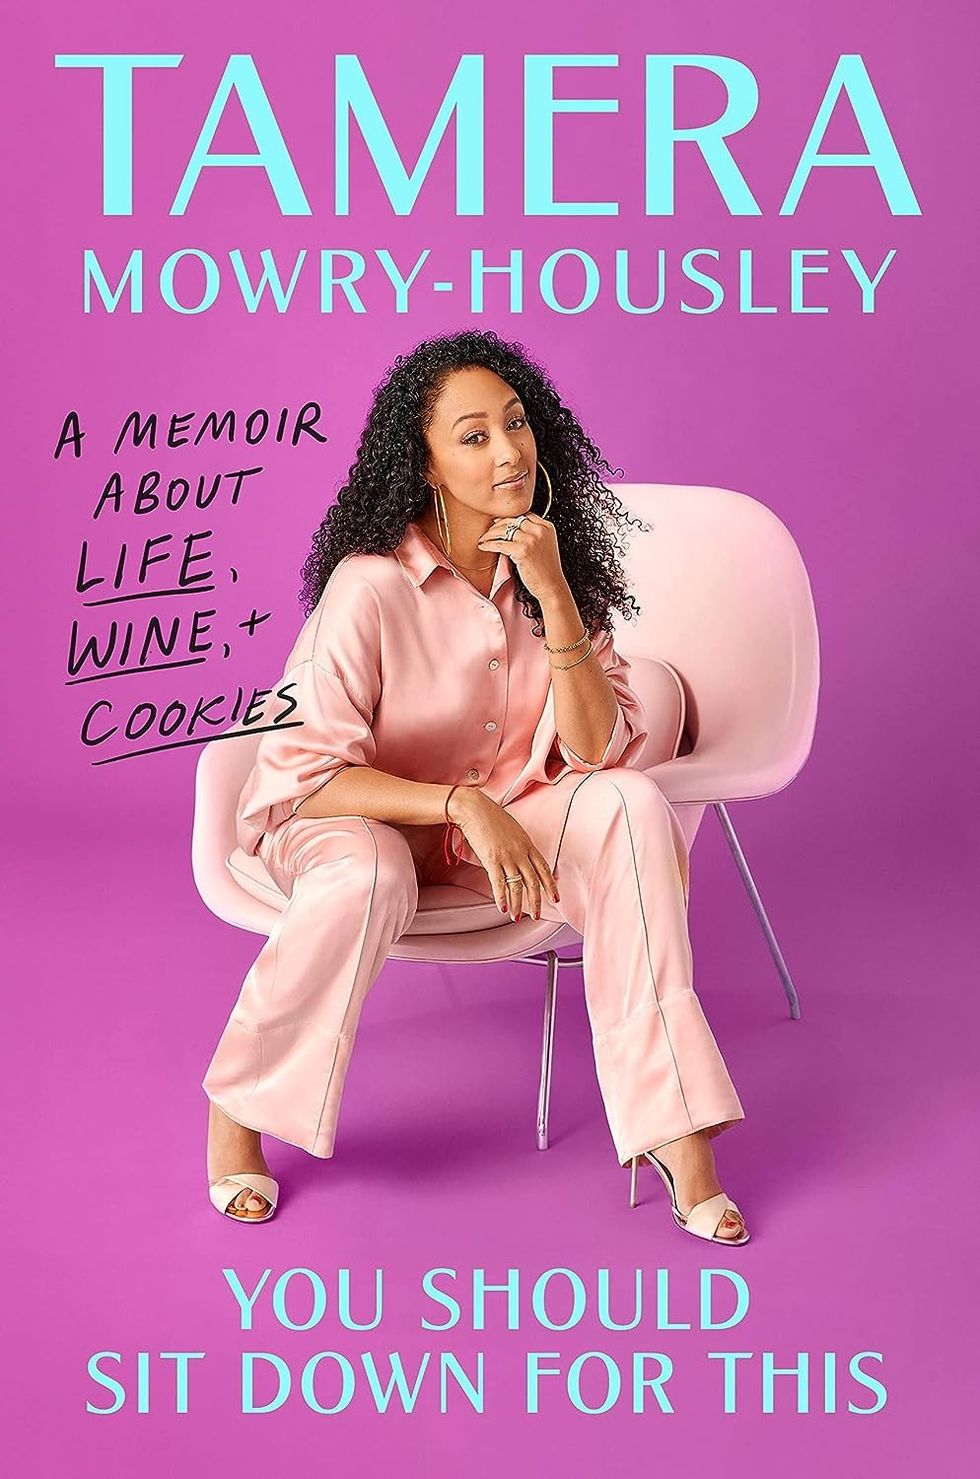 "You Should Sit Down For This" by Tamera Mowry-Housley